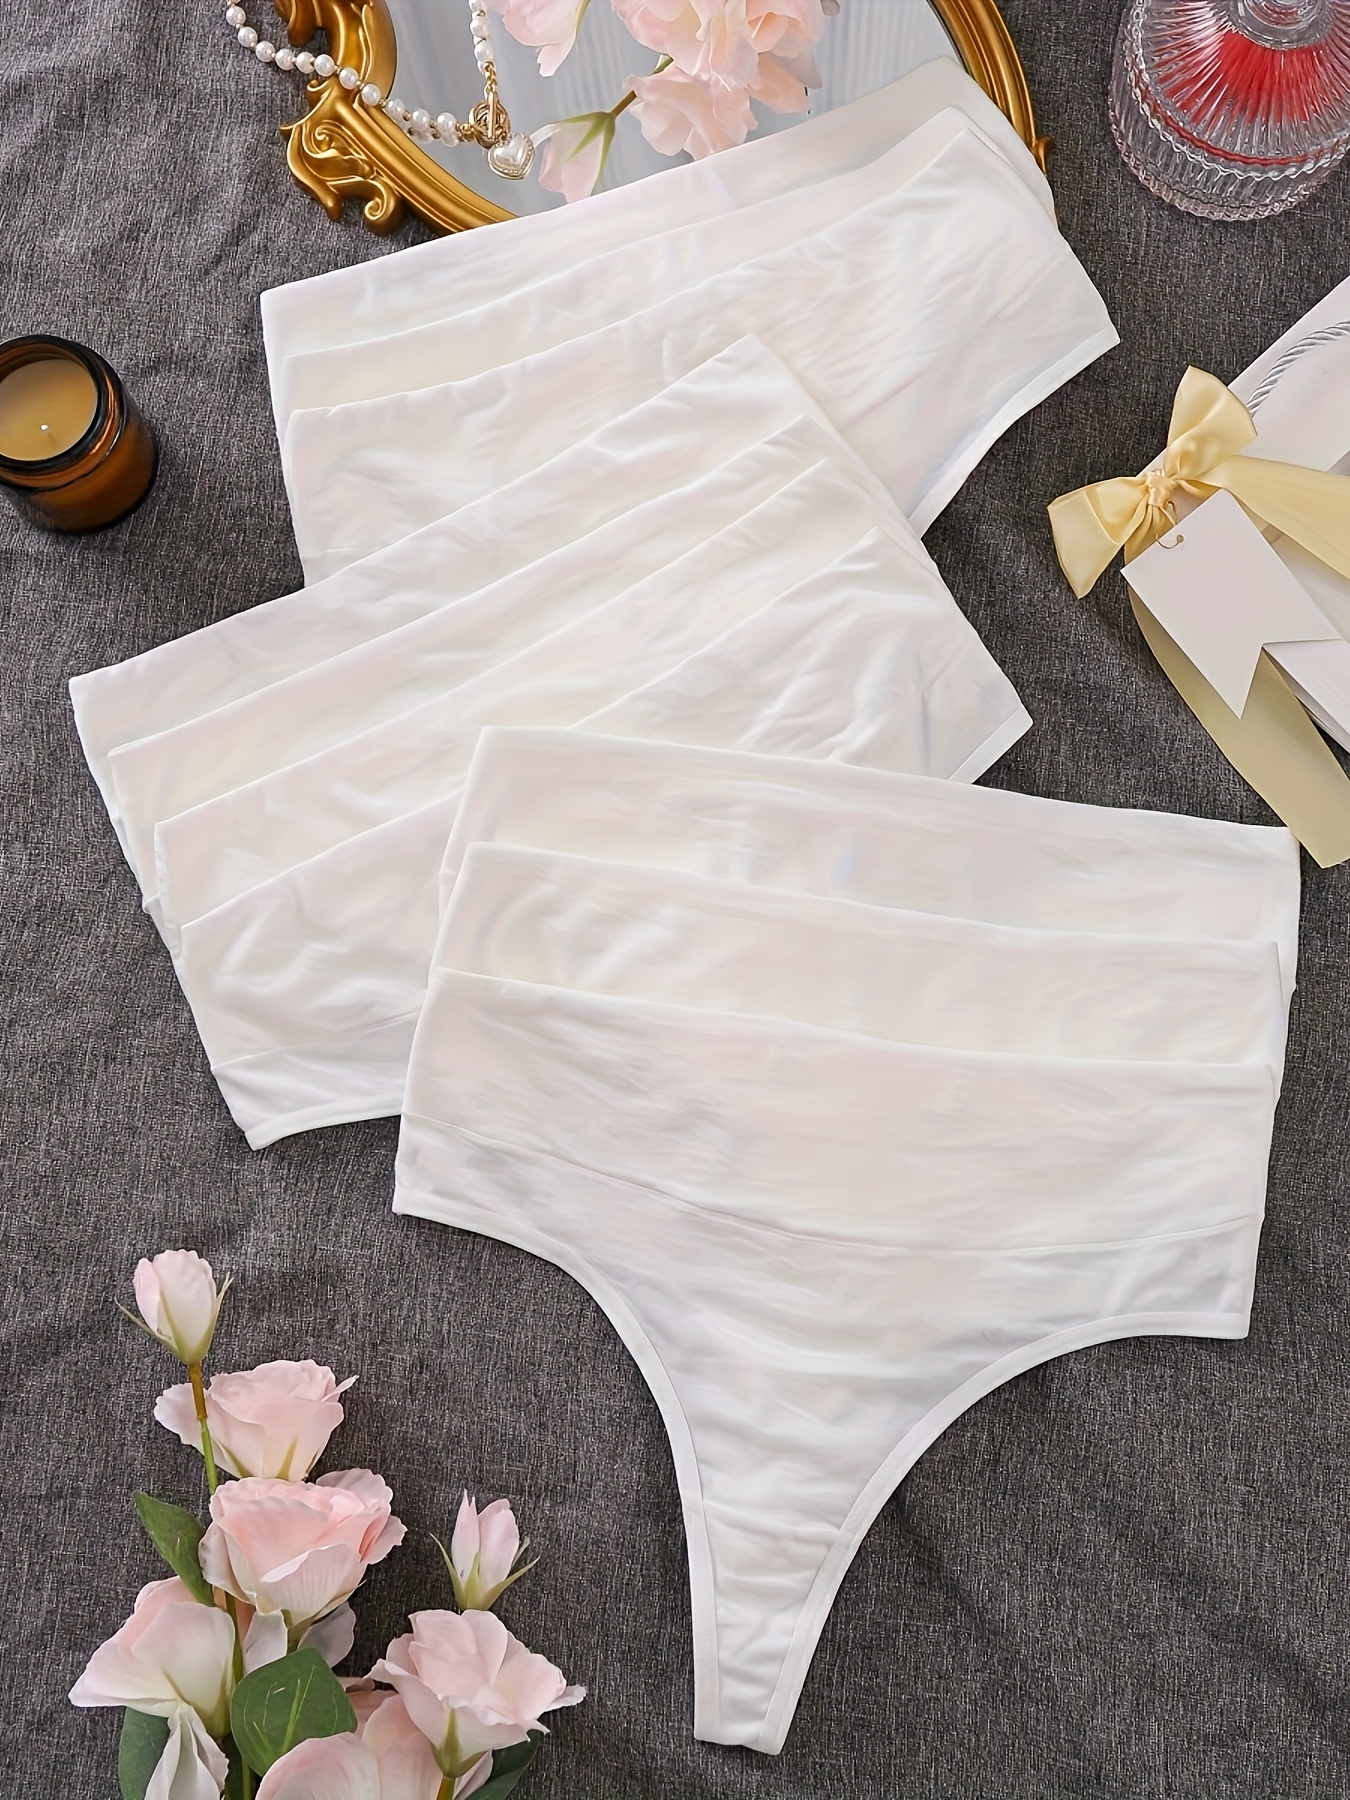 10 Pcs Simple High Waist Panties, Solid White Tummy Control Cheeky  Intimates Briefs, Women's Lingerie & Underwear